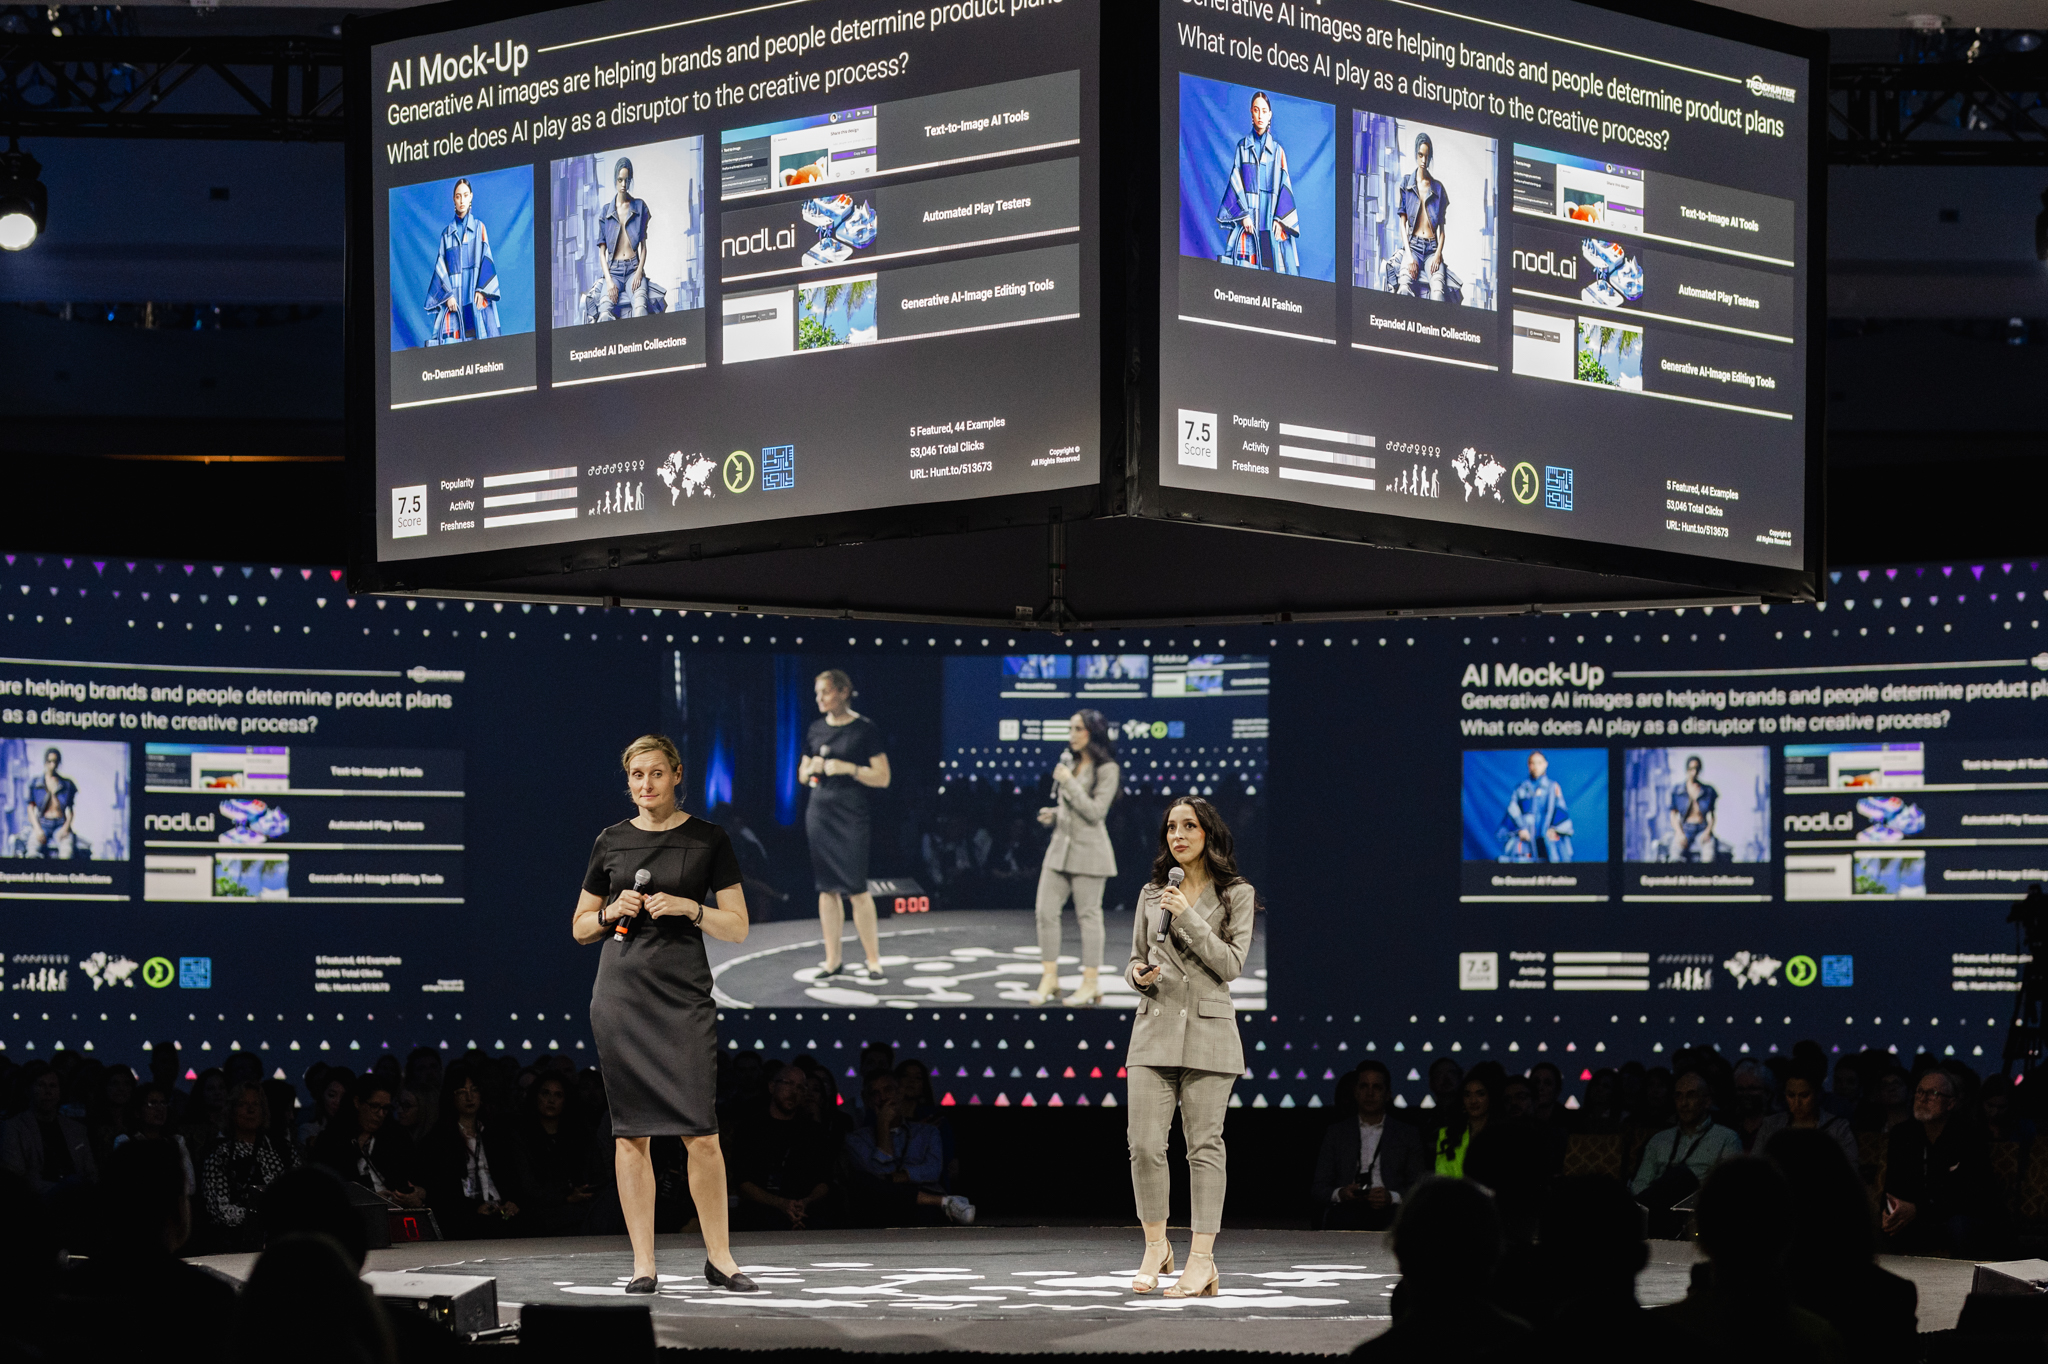 Two women standing on stage in front of a large screen captured in event photography.